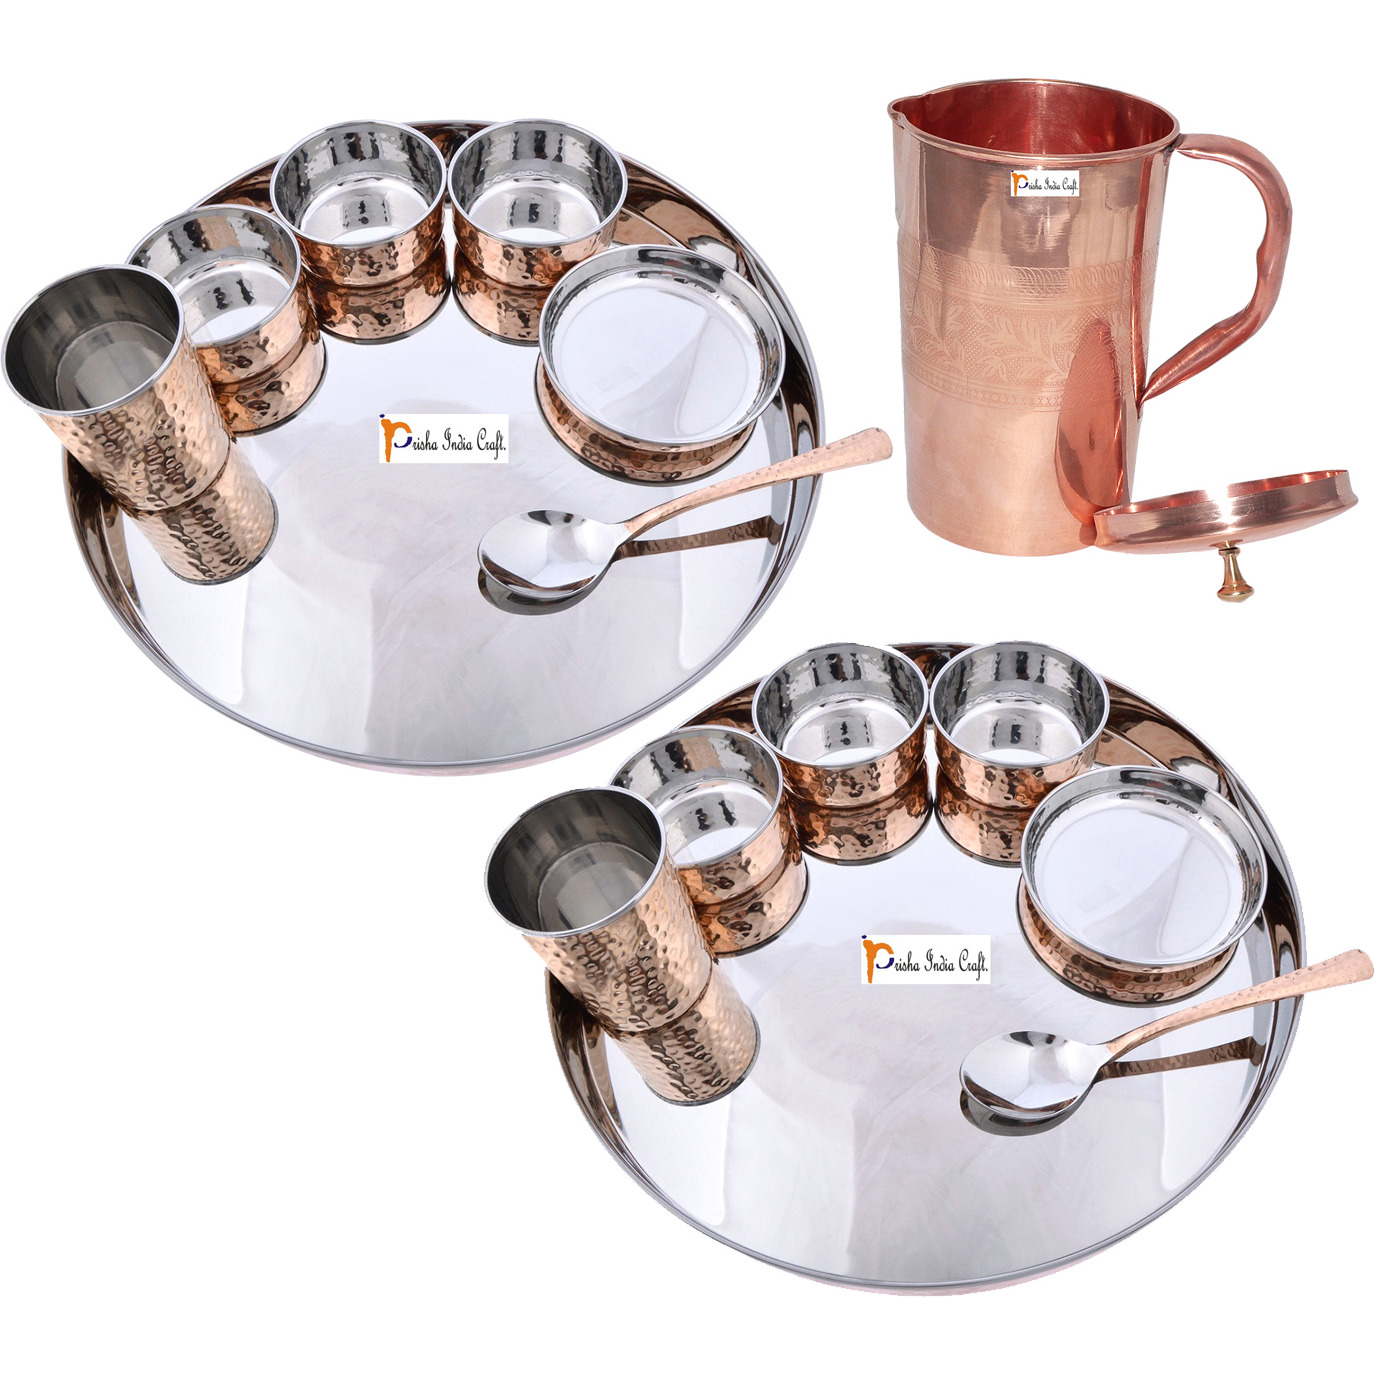 Prisha India Craft B. Set of 2 Dinnerware Traditional Stainless Steel Copper Dinner Set of Thali Plate, Bowls, Glass and Spoon, Dia 13  With 1 Pure Copper Embossed Pitcher Jug - Christmas Gift